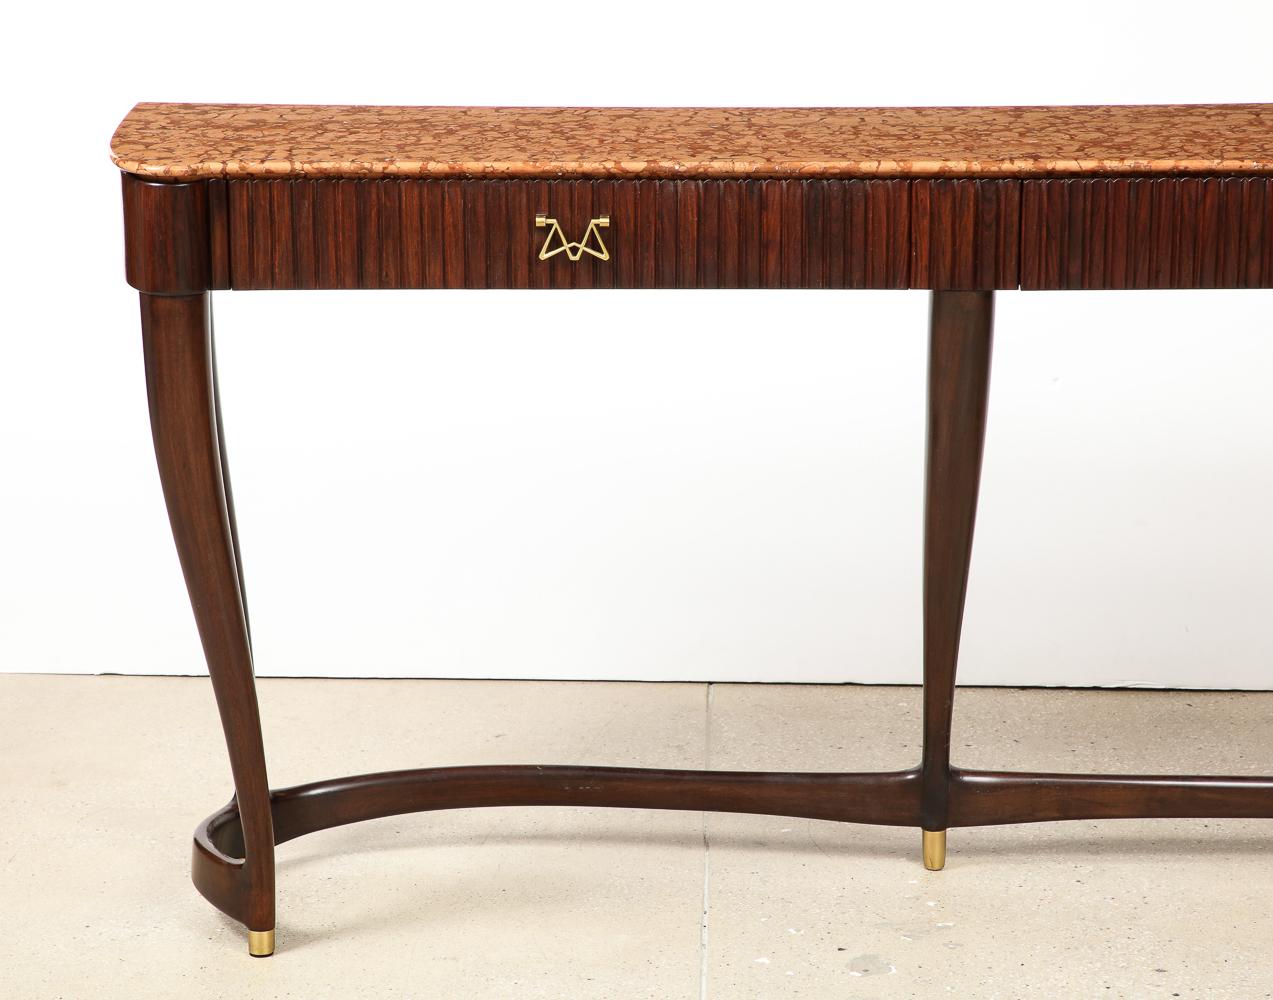 Console Table No. 7103 by Osvaldo Borsani for ABV.  Marble, mahogany, rosewood, bronze, brass. 2-drawer variant of a highly sought after design. Retains original Borsani ABV label inside of drawer.